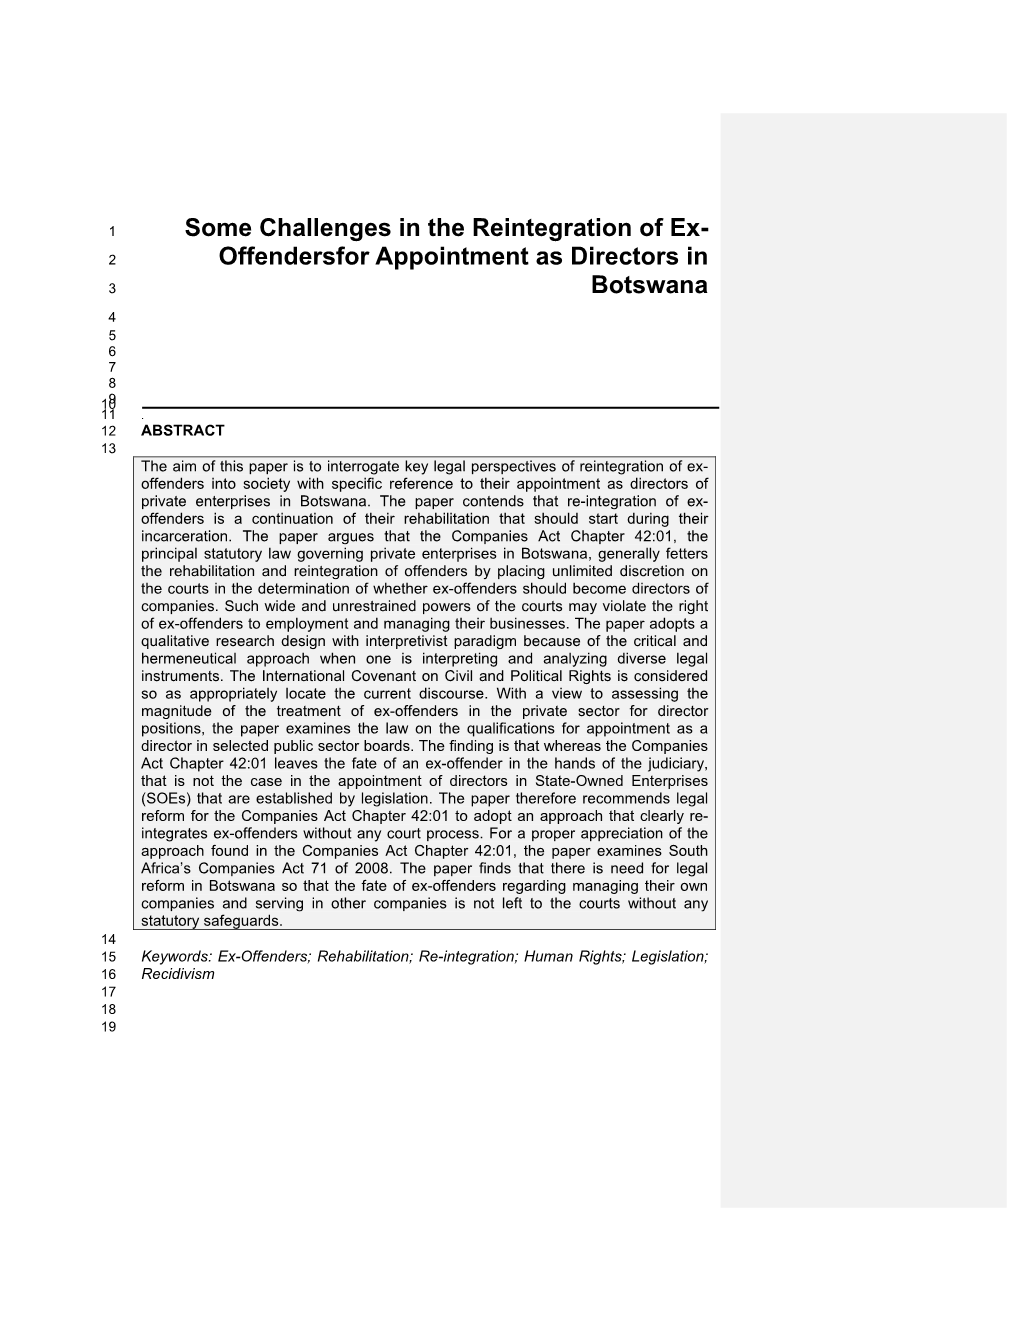 Some Challenges in the Reintegration of Ex- Offendersfor Appointment As